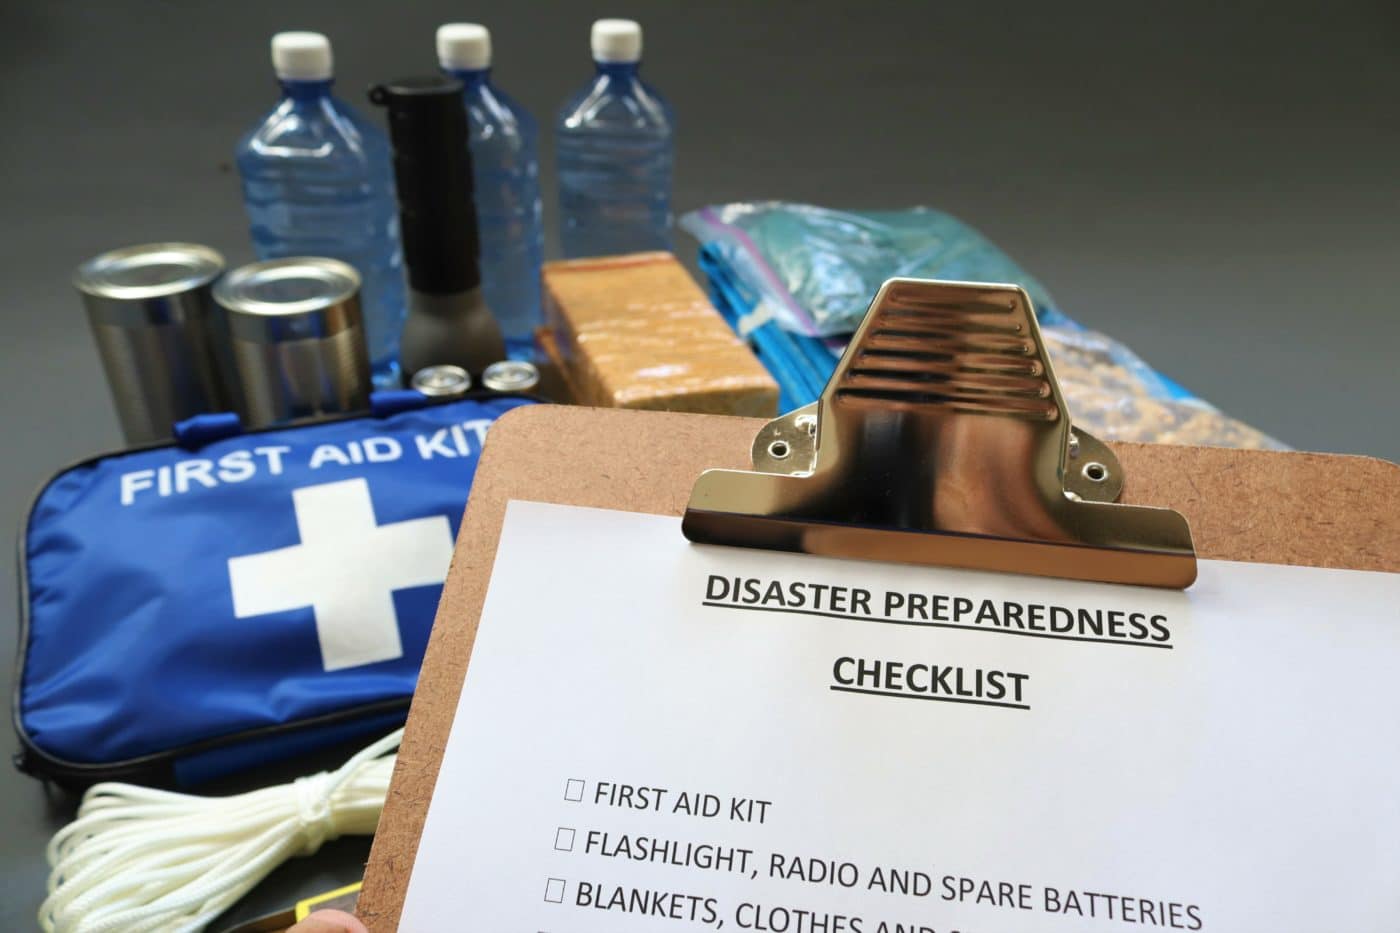 Disaster Preparedness Checklist On A Clipboard With Disaster Rel